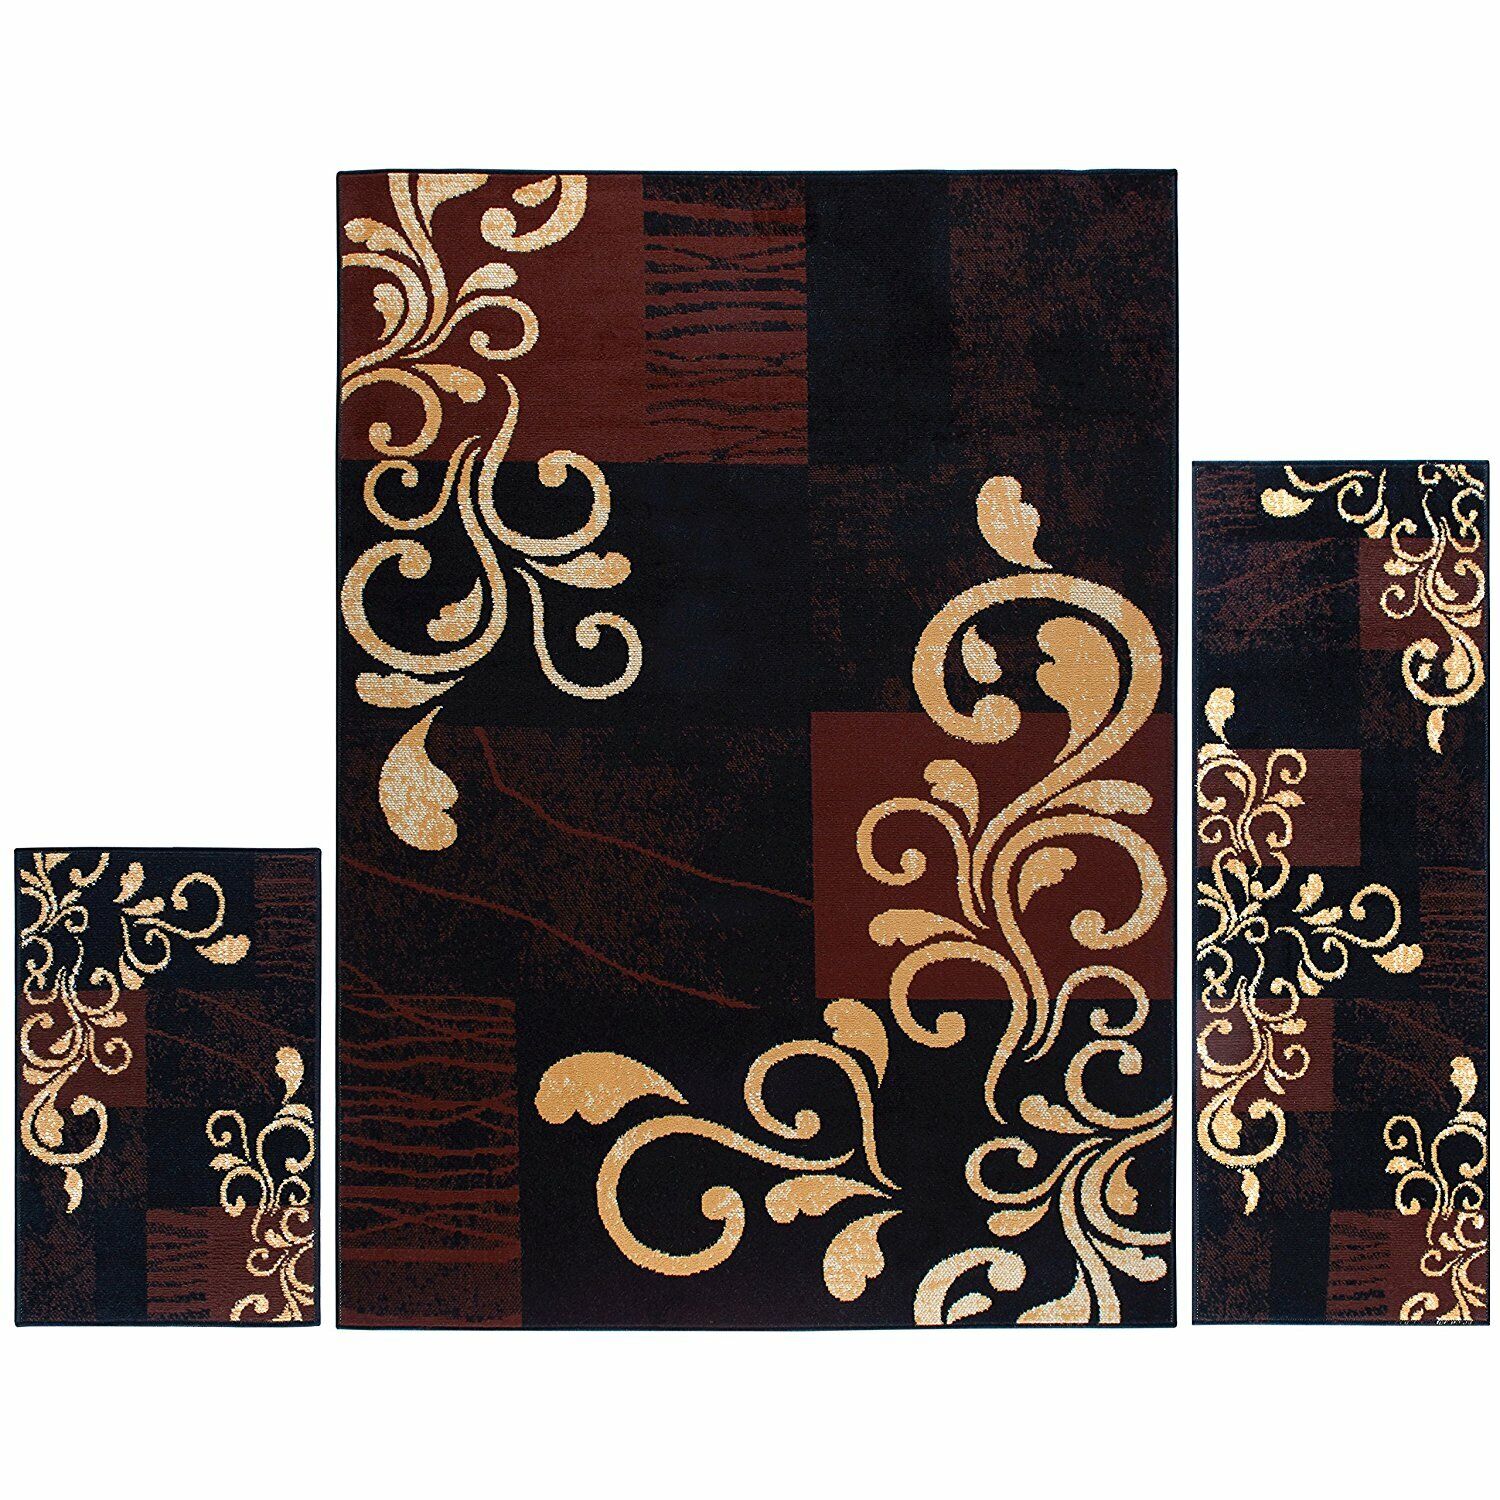 Black Brown Gold Scroll 3 pc Area Rug Set Accent Mat Carpet Runner 5 x 7 ft 2x3 Unknown Does Not Apply